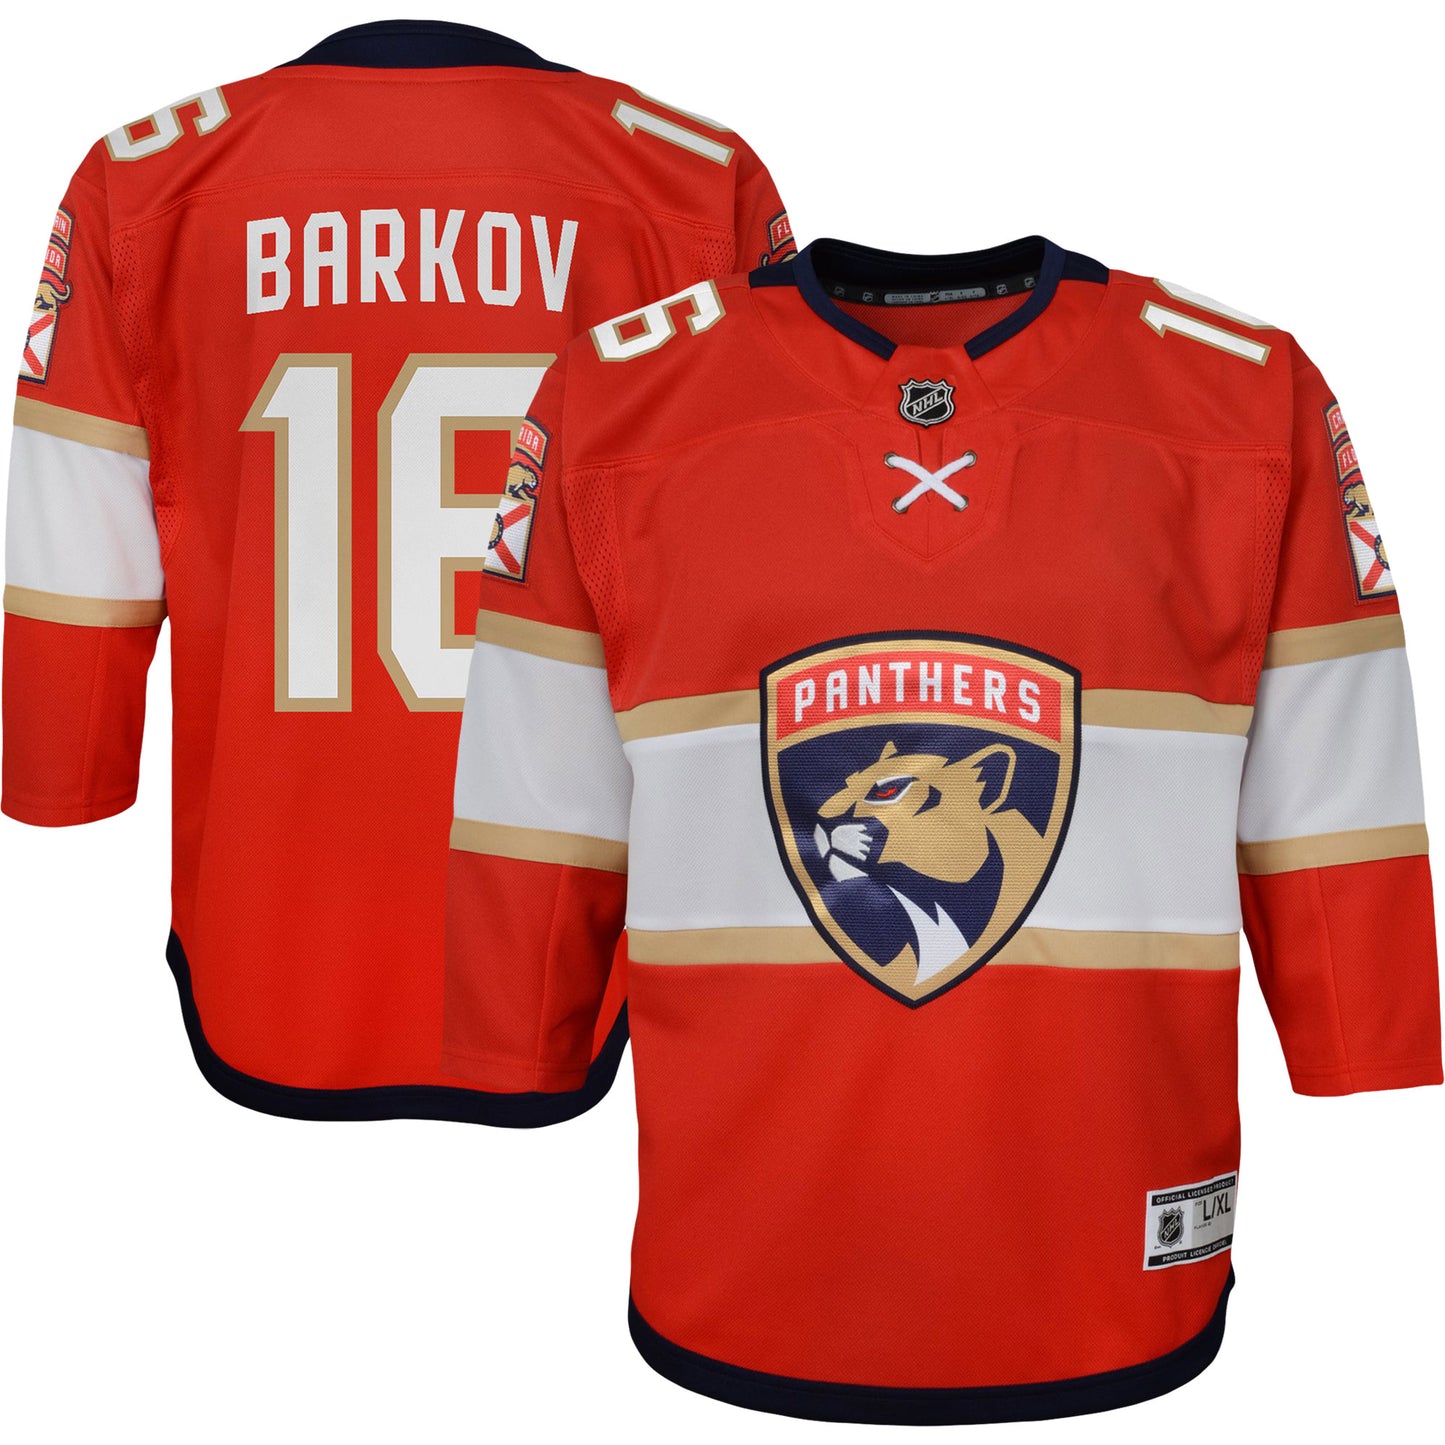 Aleksander Barkov Florida Panthers Youth Home Captain Replica Player Jersey - Red